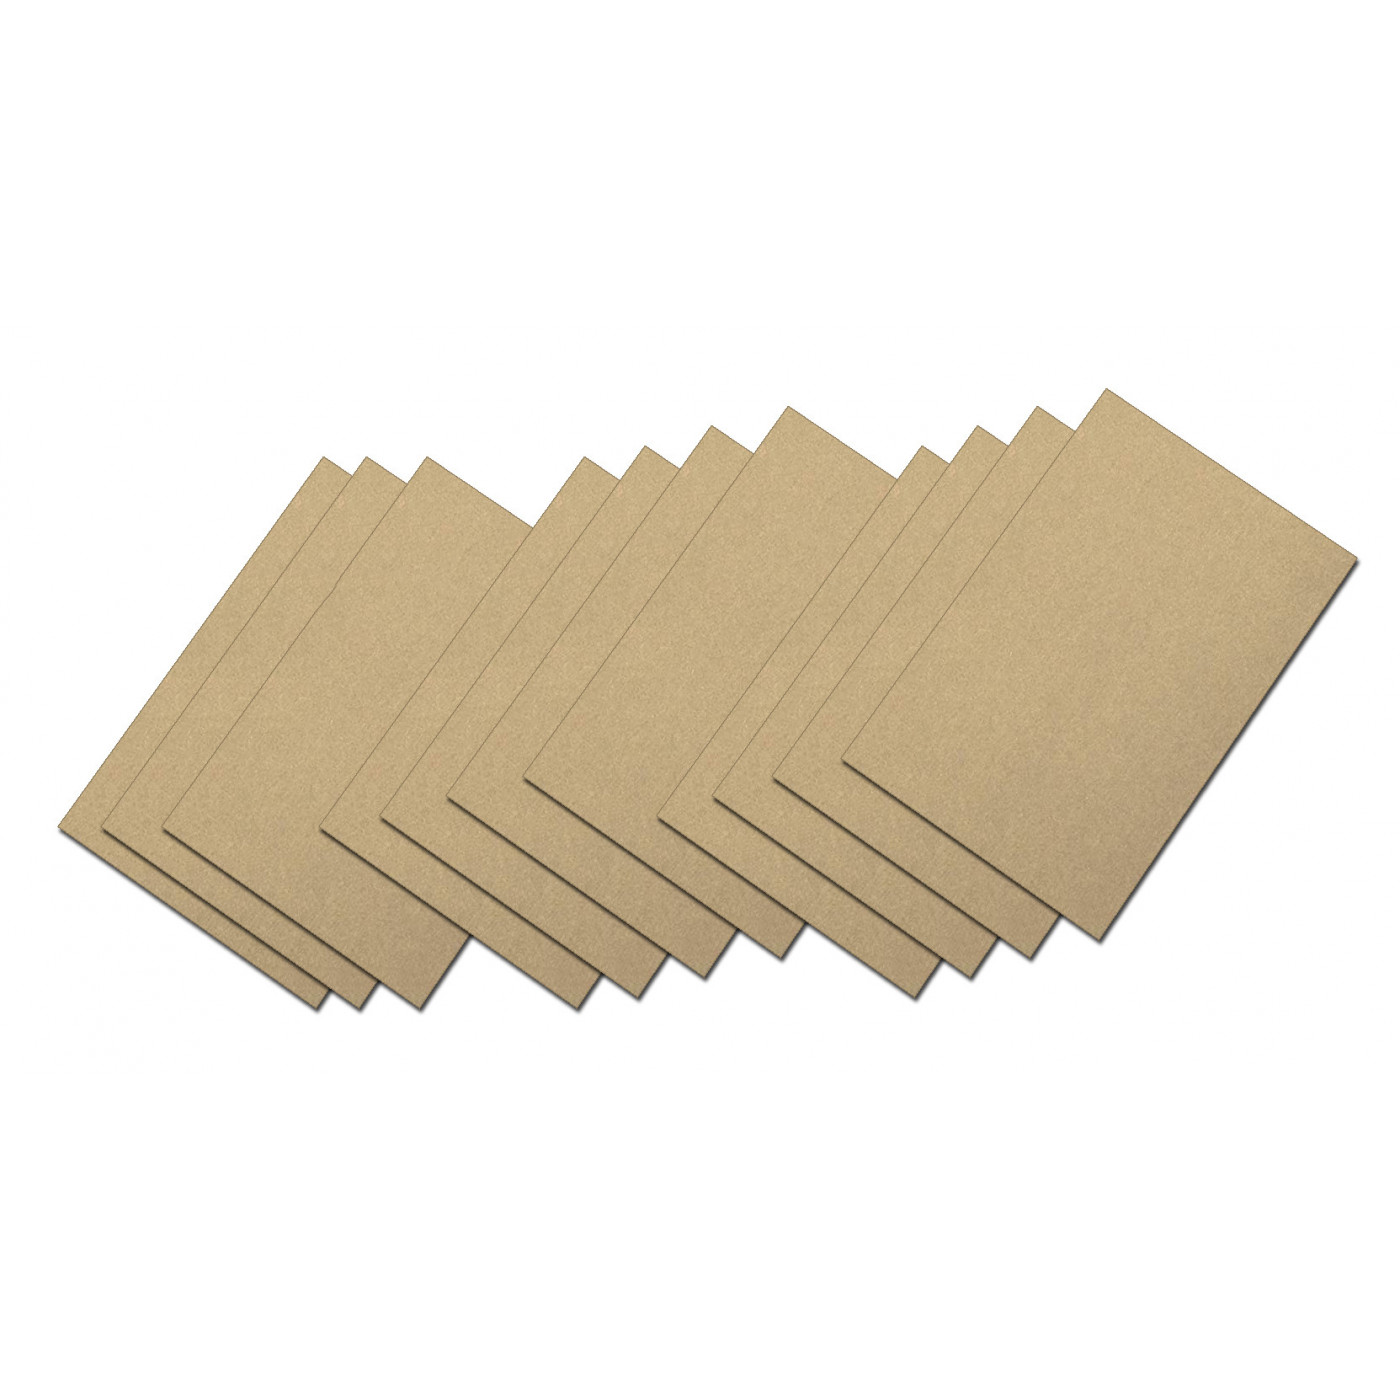 Set of 55 small sandpaper sheets (grit 60, 100, 150)